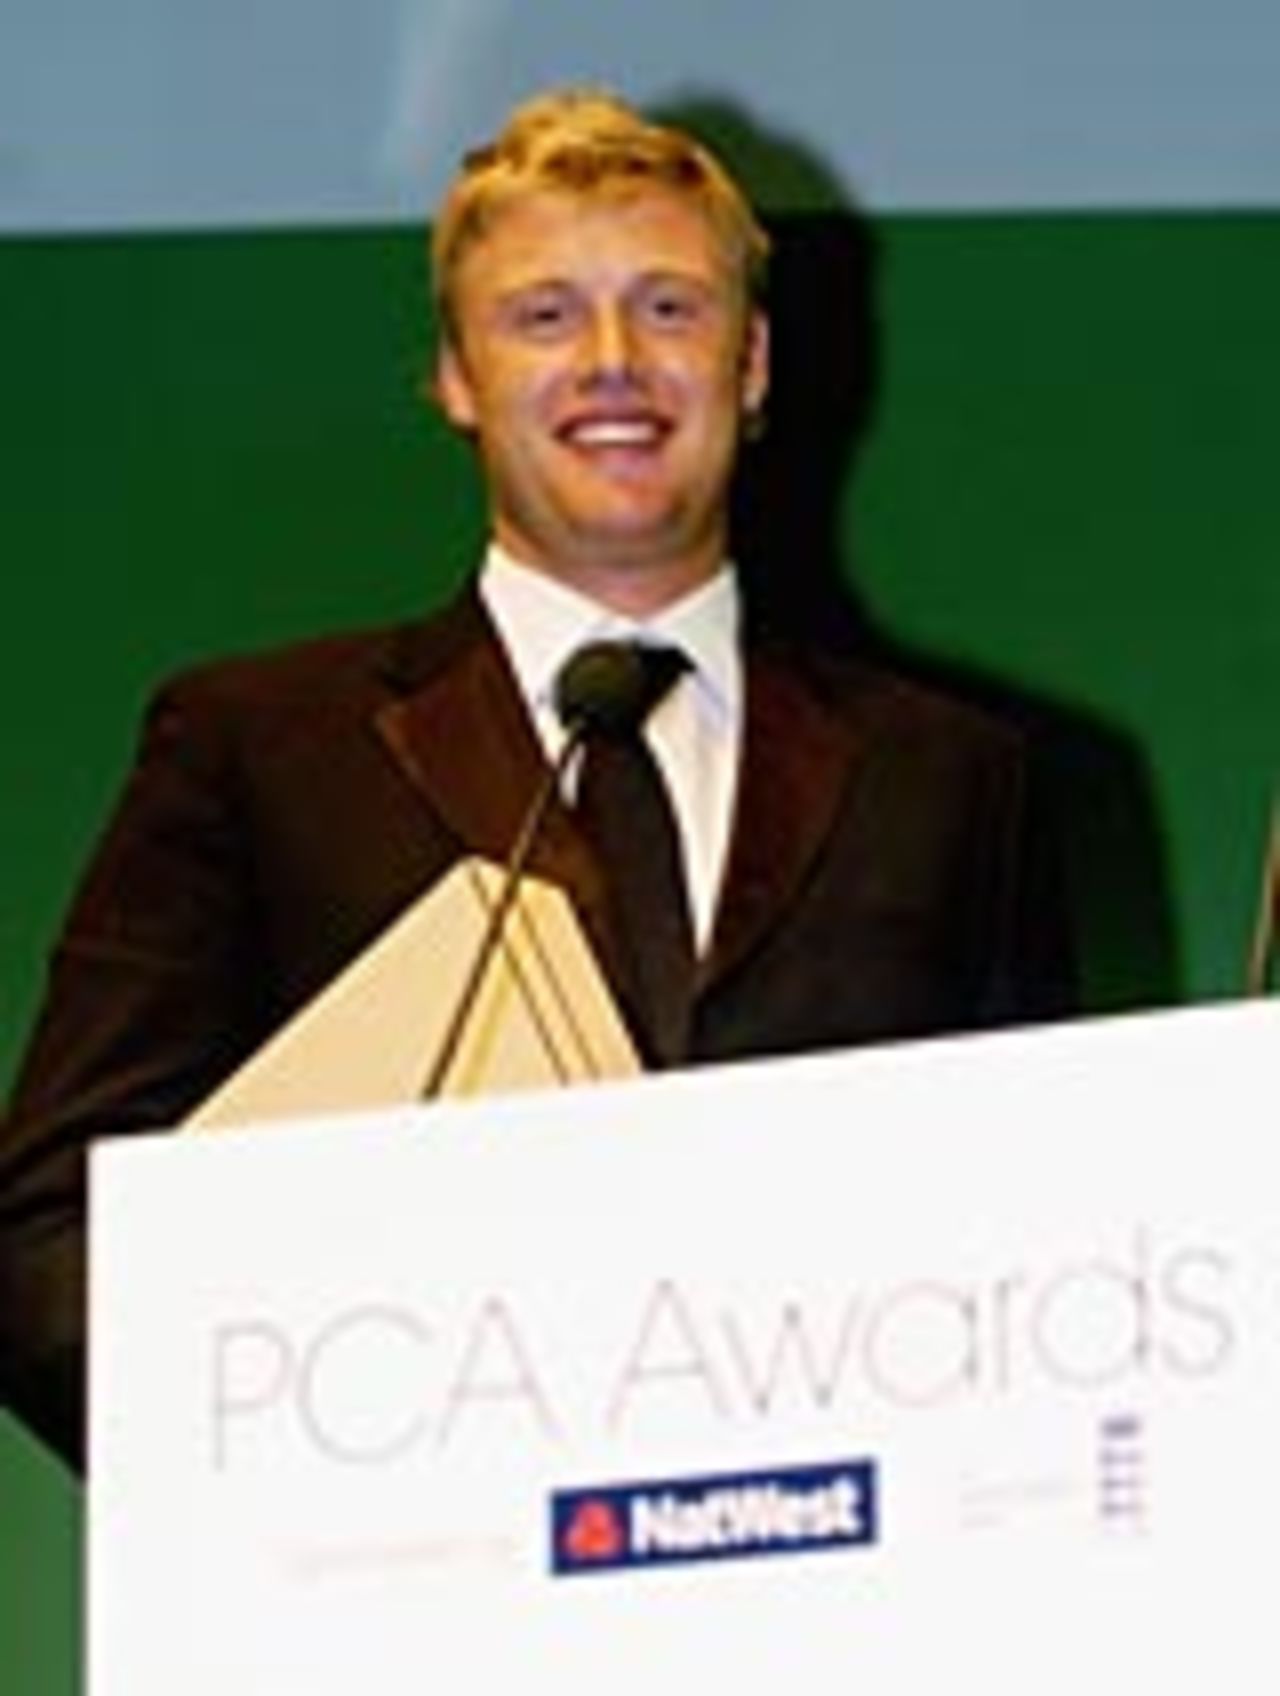 Andrew Flintoff with the PCA Player of the Year award, September 20, 2004